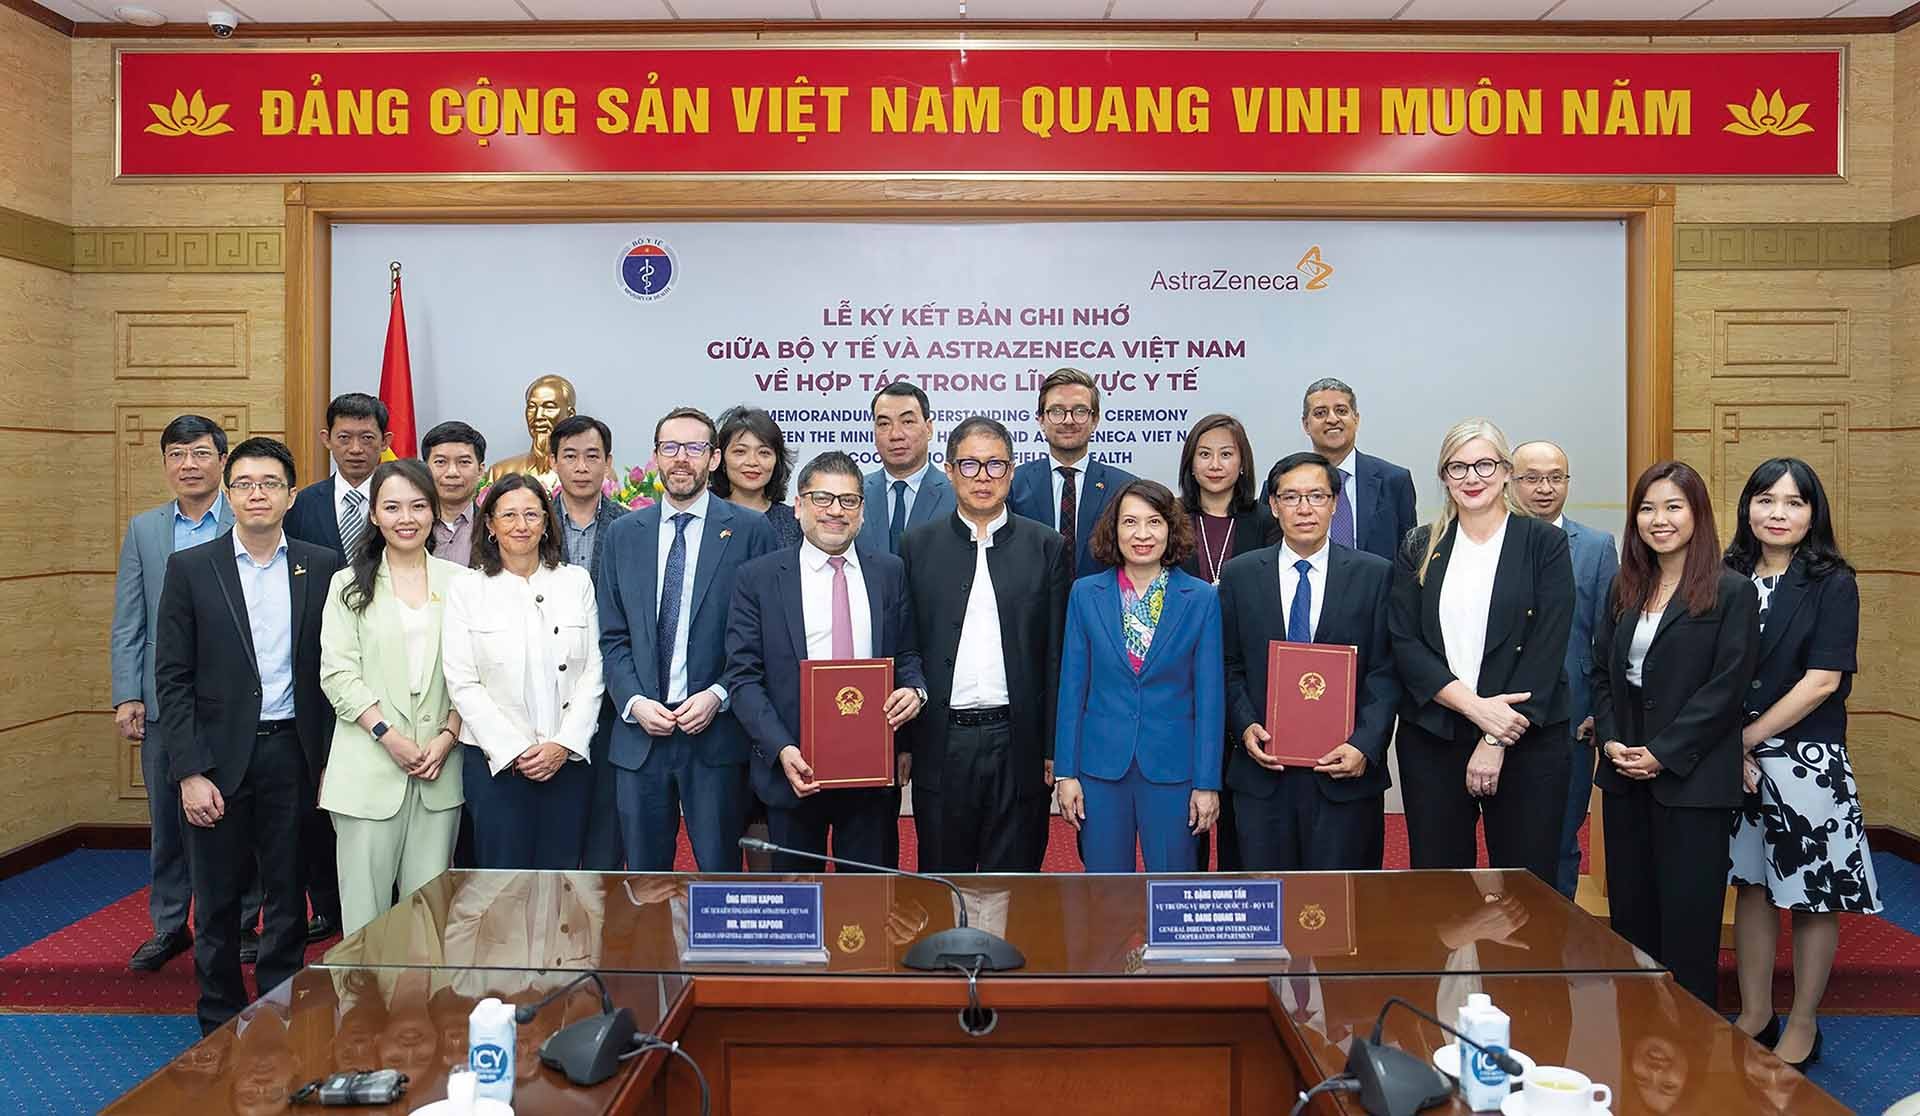 The Ministry of Health and AstraZeneca Vietnam at the Memorandum of Understanding signing ceremony on March 8, 2023